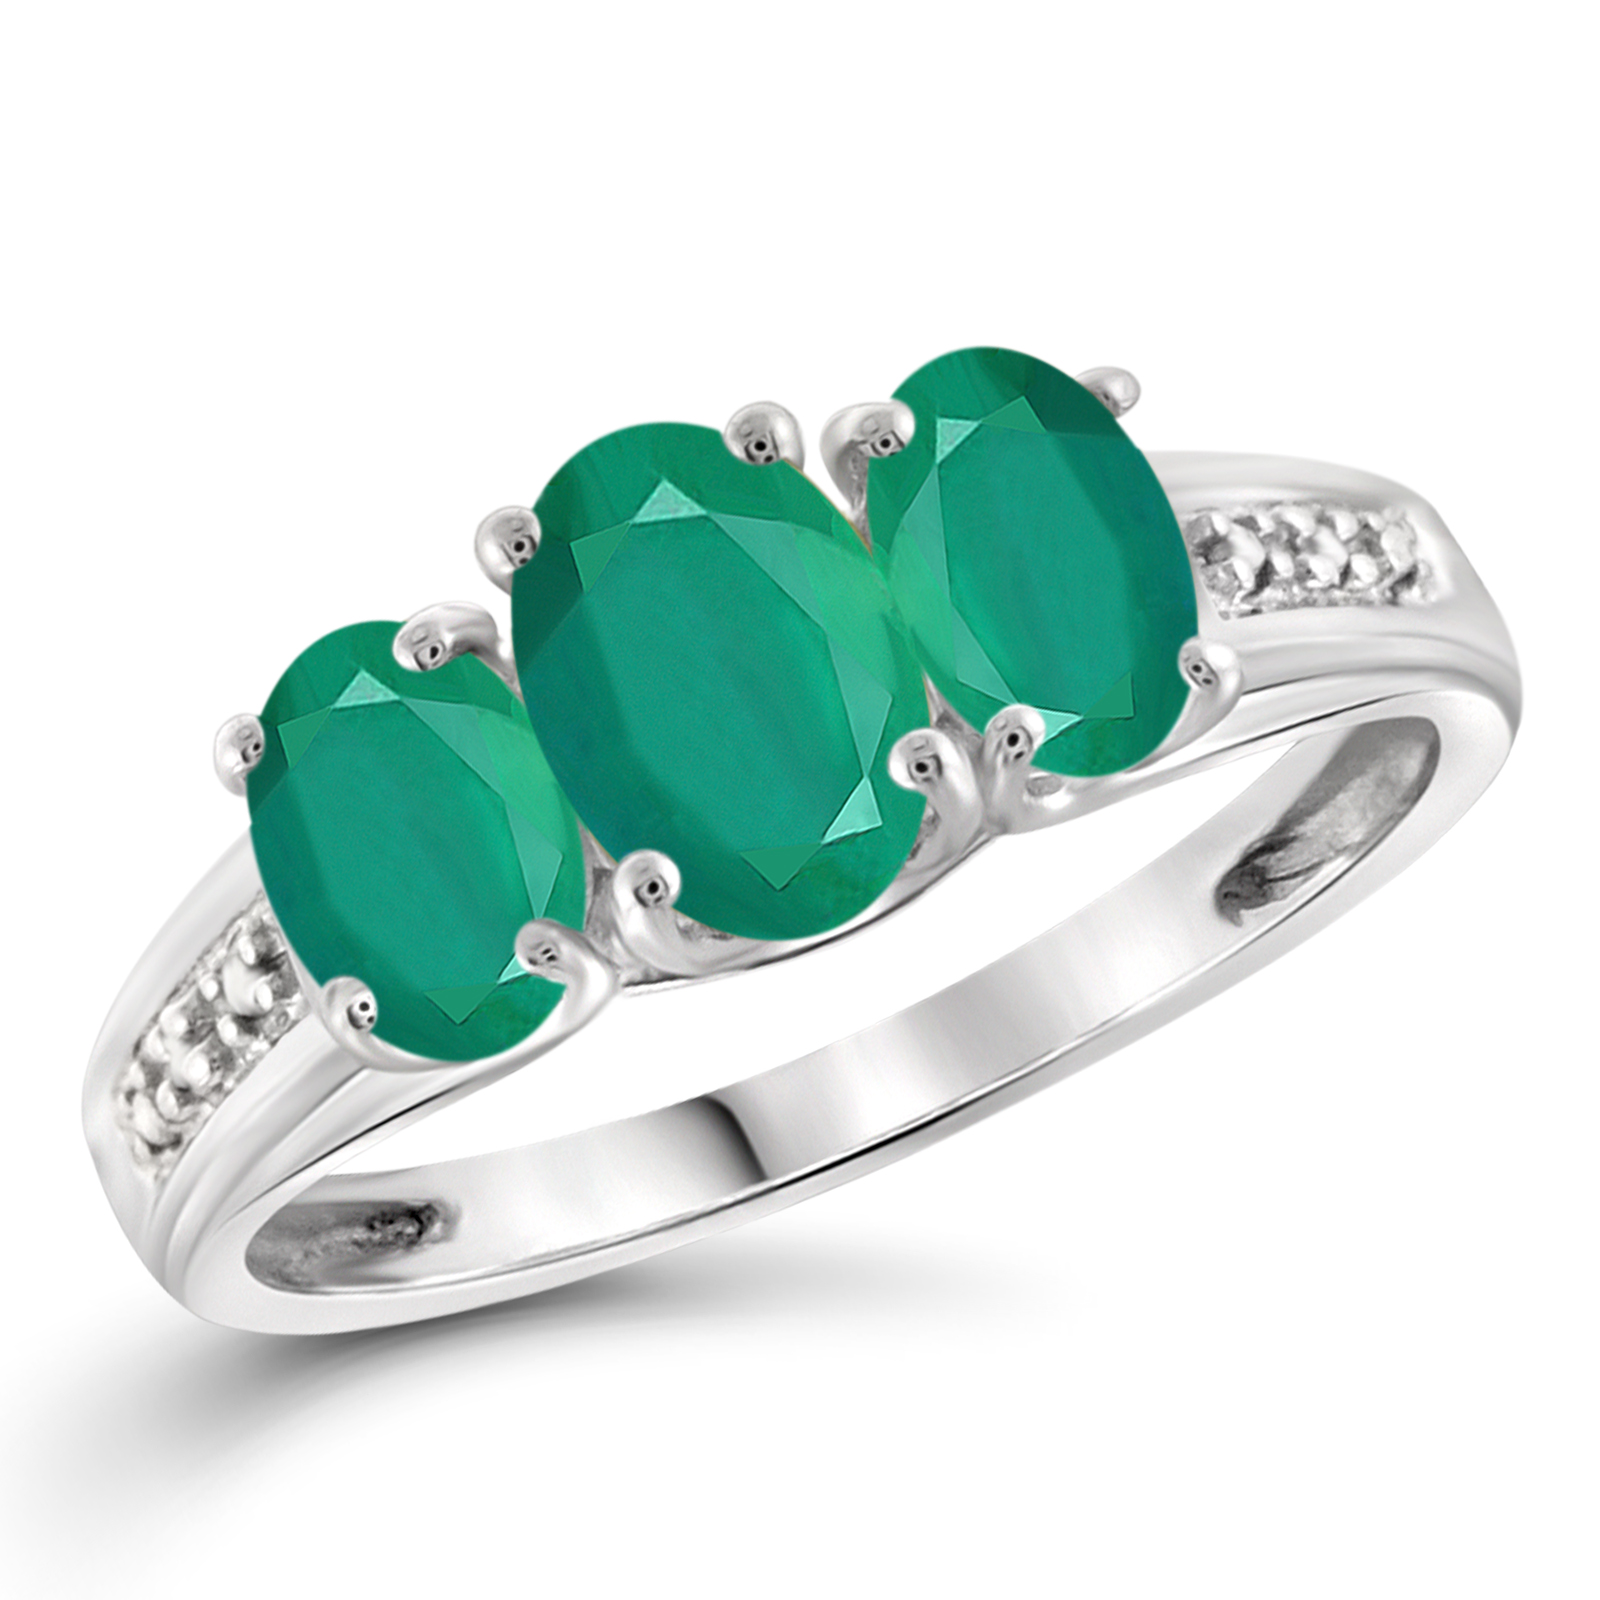 1.49 CTTW Created Emerald Gemstone & Accent White Diamond Ring In Sterling Silver